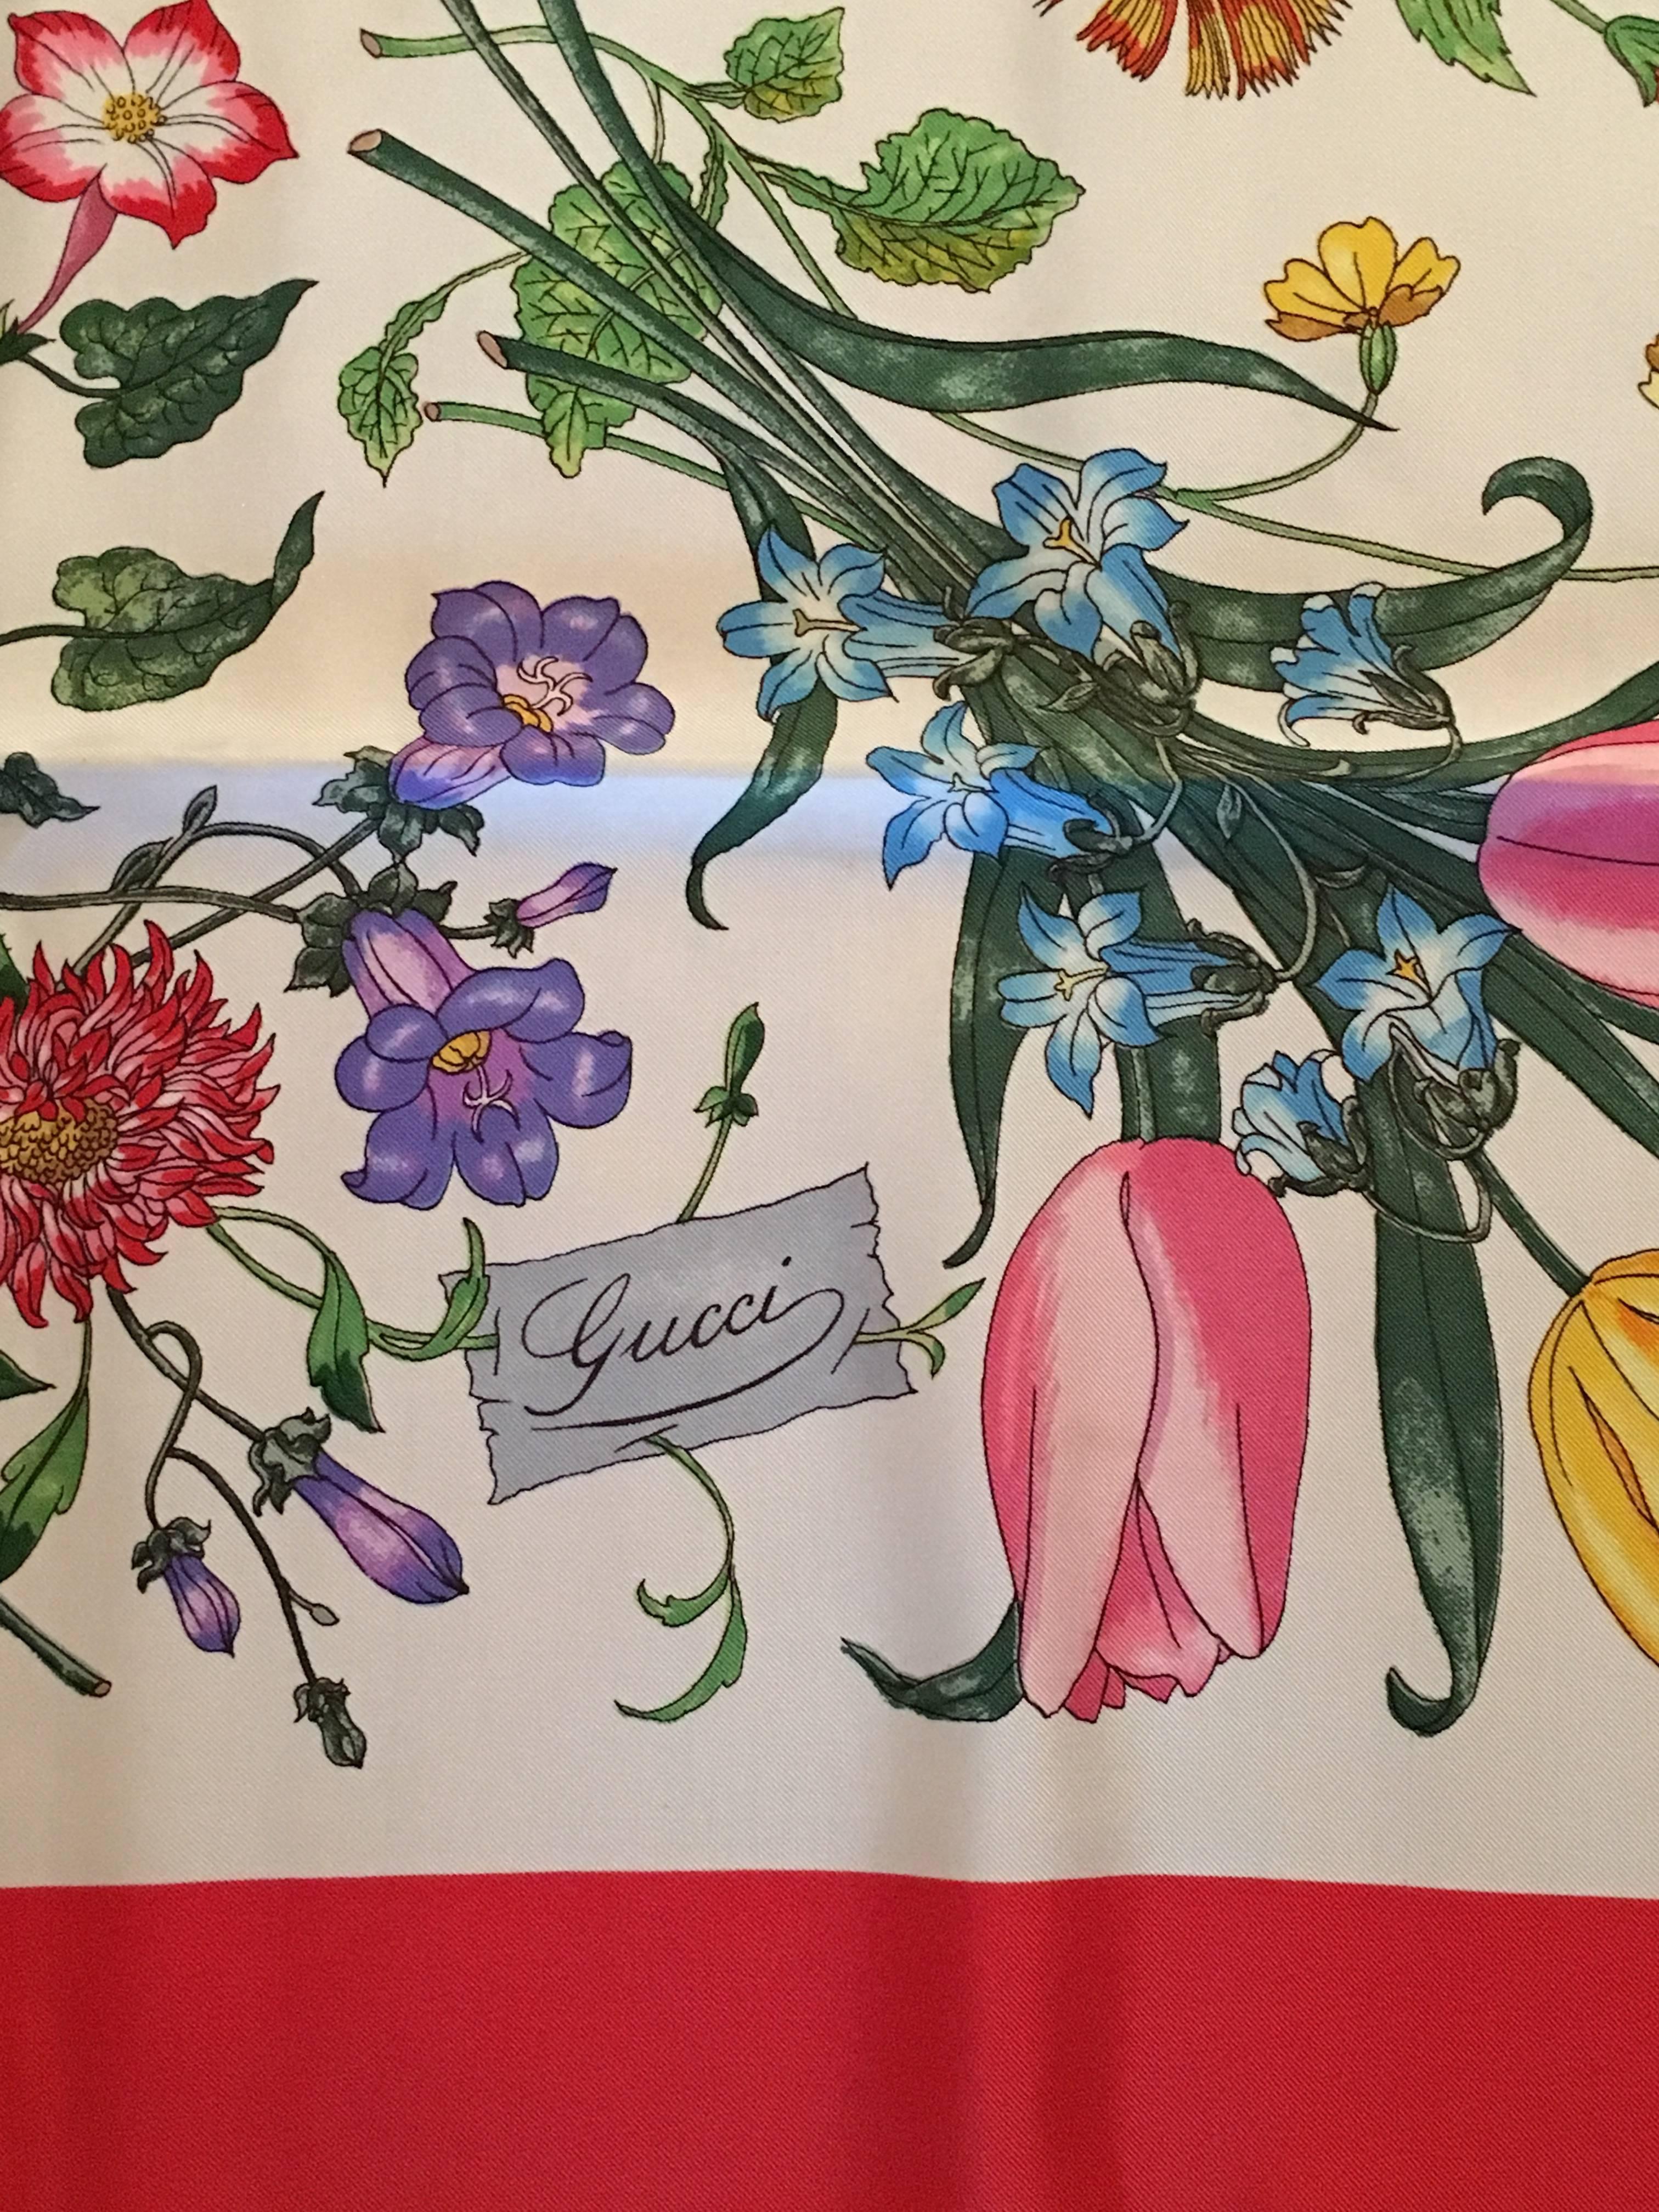 gucci flora scarf for grace kelly